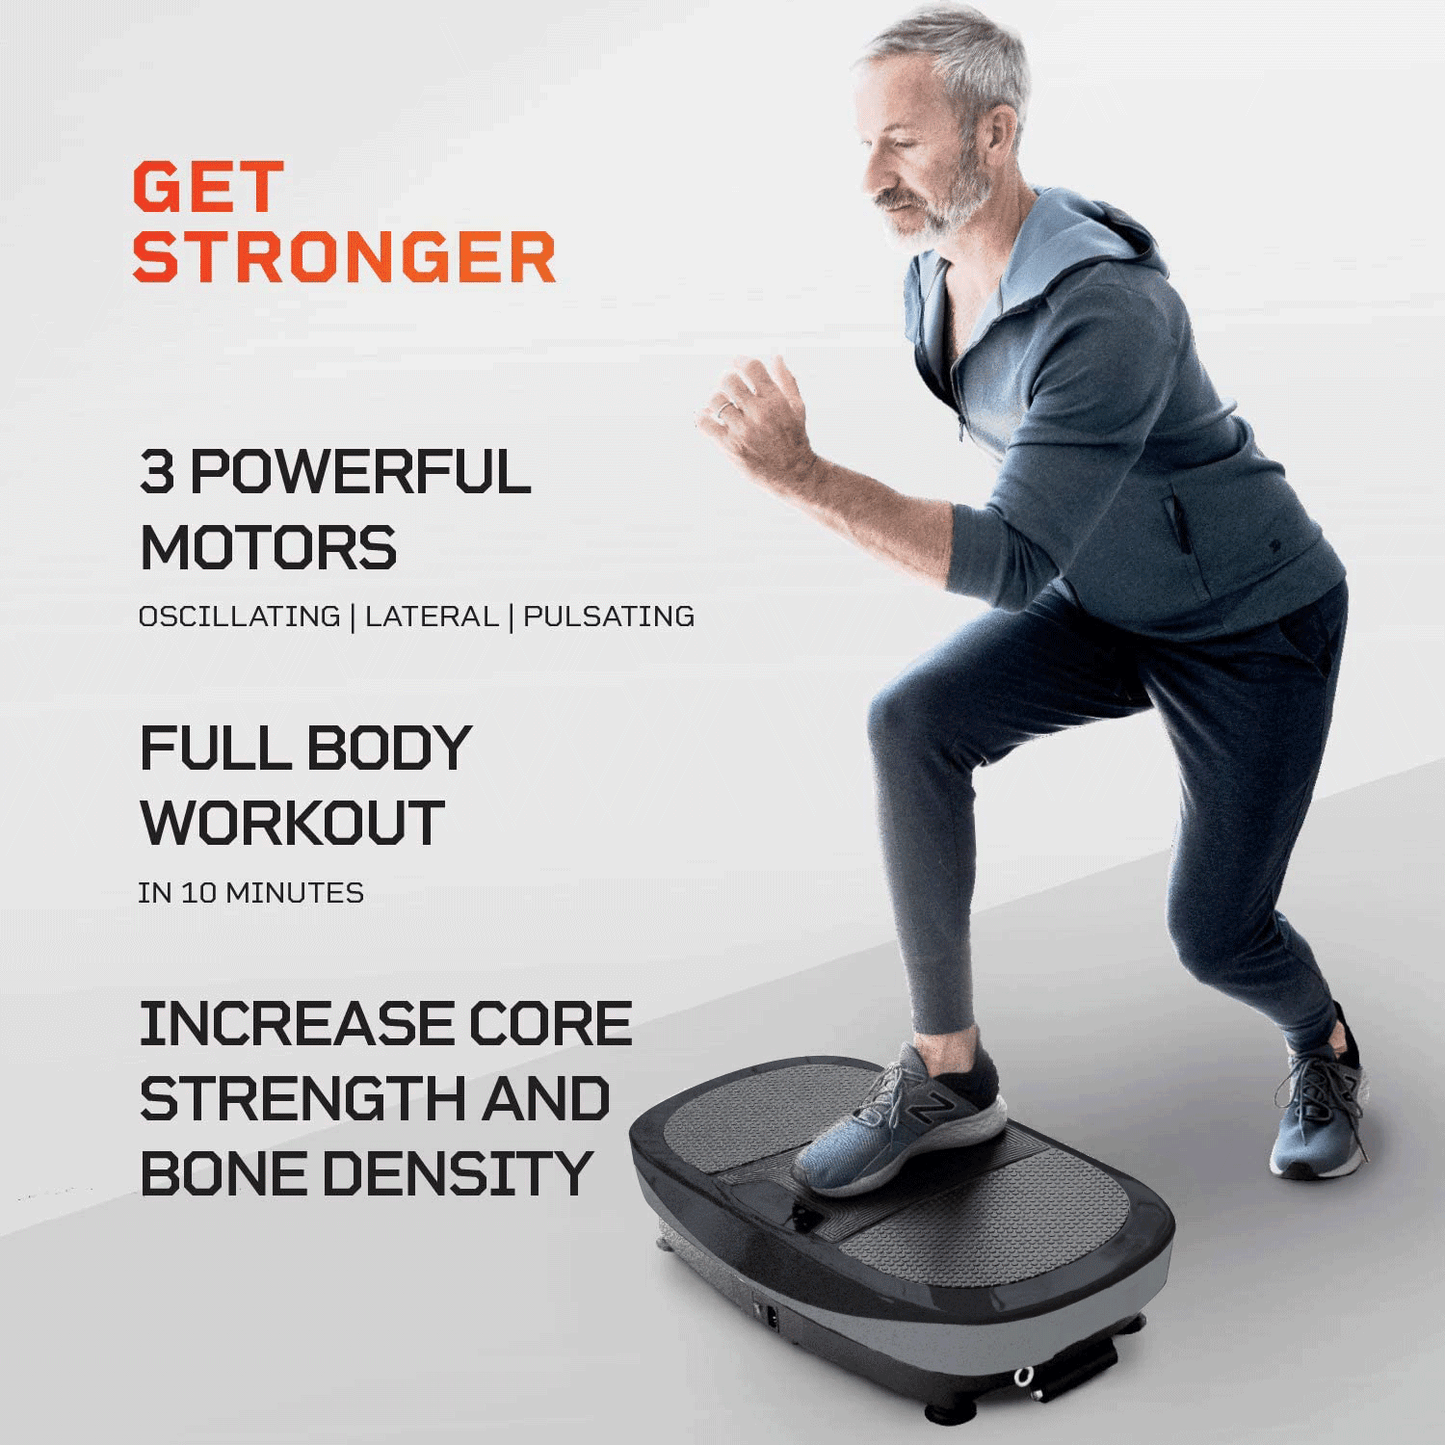 LifePro Rumblex Max 4D Vibration Plate Exercise Machine with Loop Resistance Bands - Full Body Workout Equipment for Home Fitness, Shaping, Training, Recovery, Weight Loss